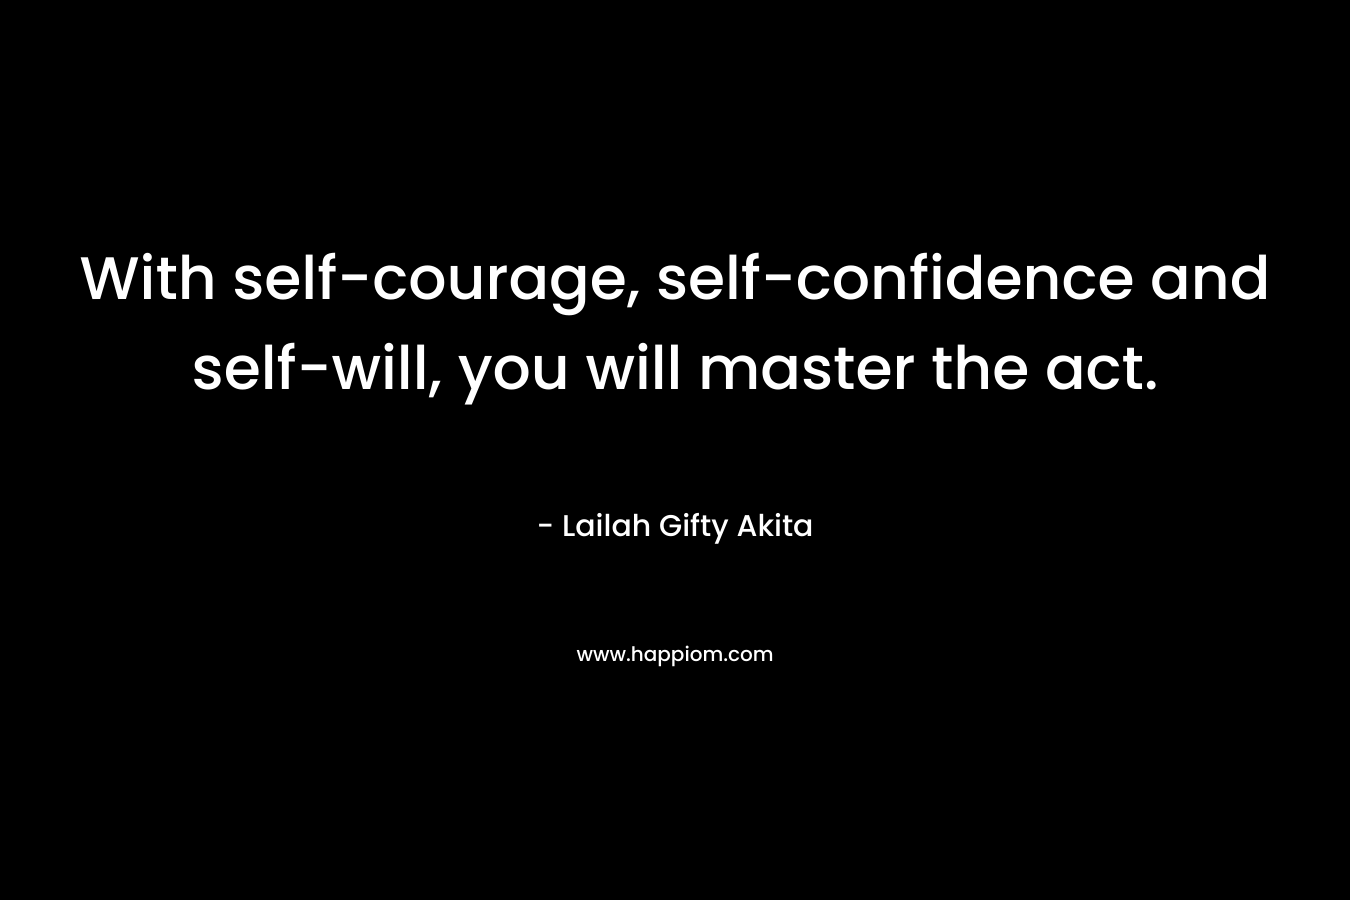 With self-courage, self-confidence and self-will, you will master the act. – Lailah Gifty Akita